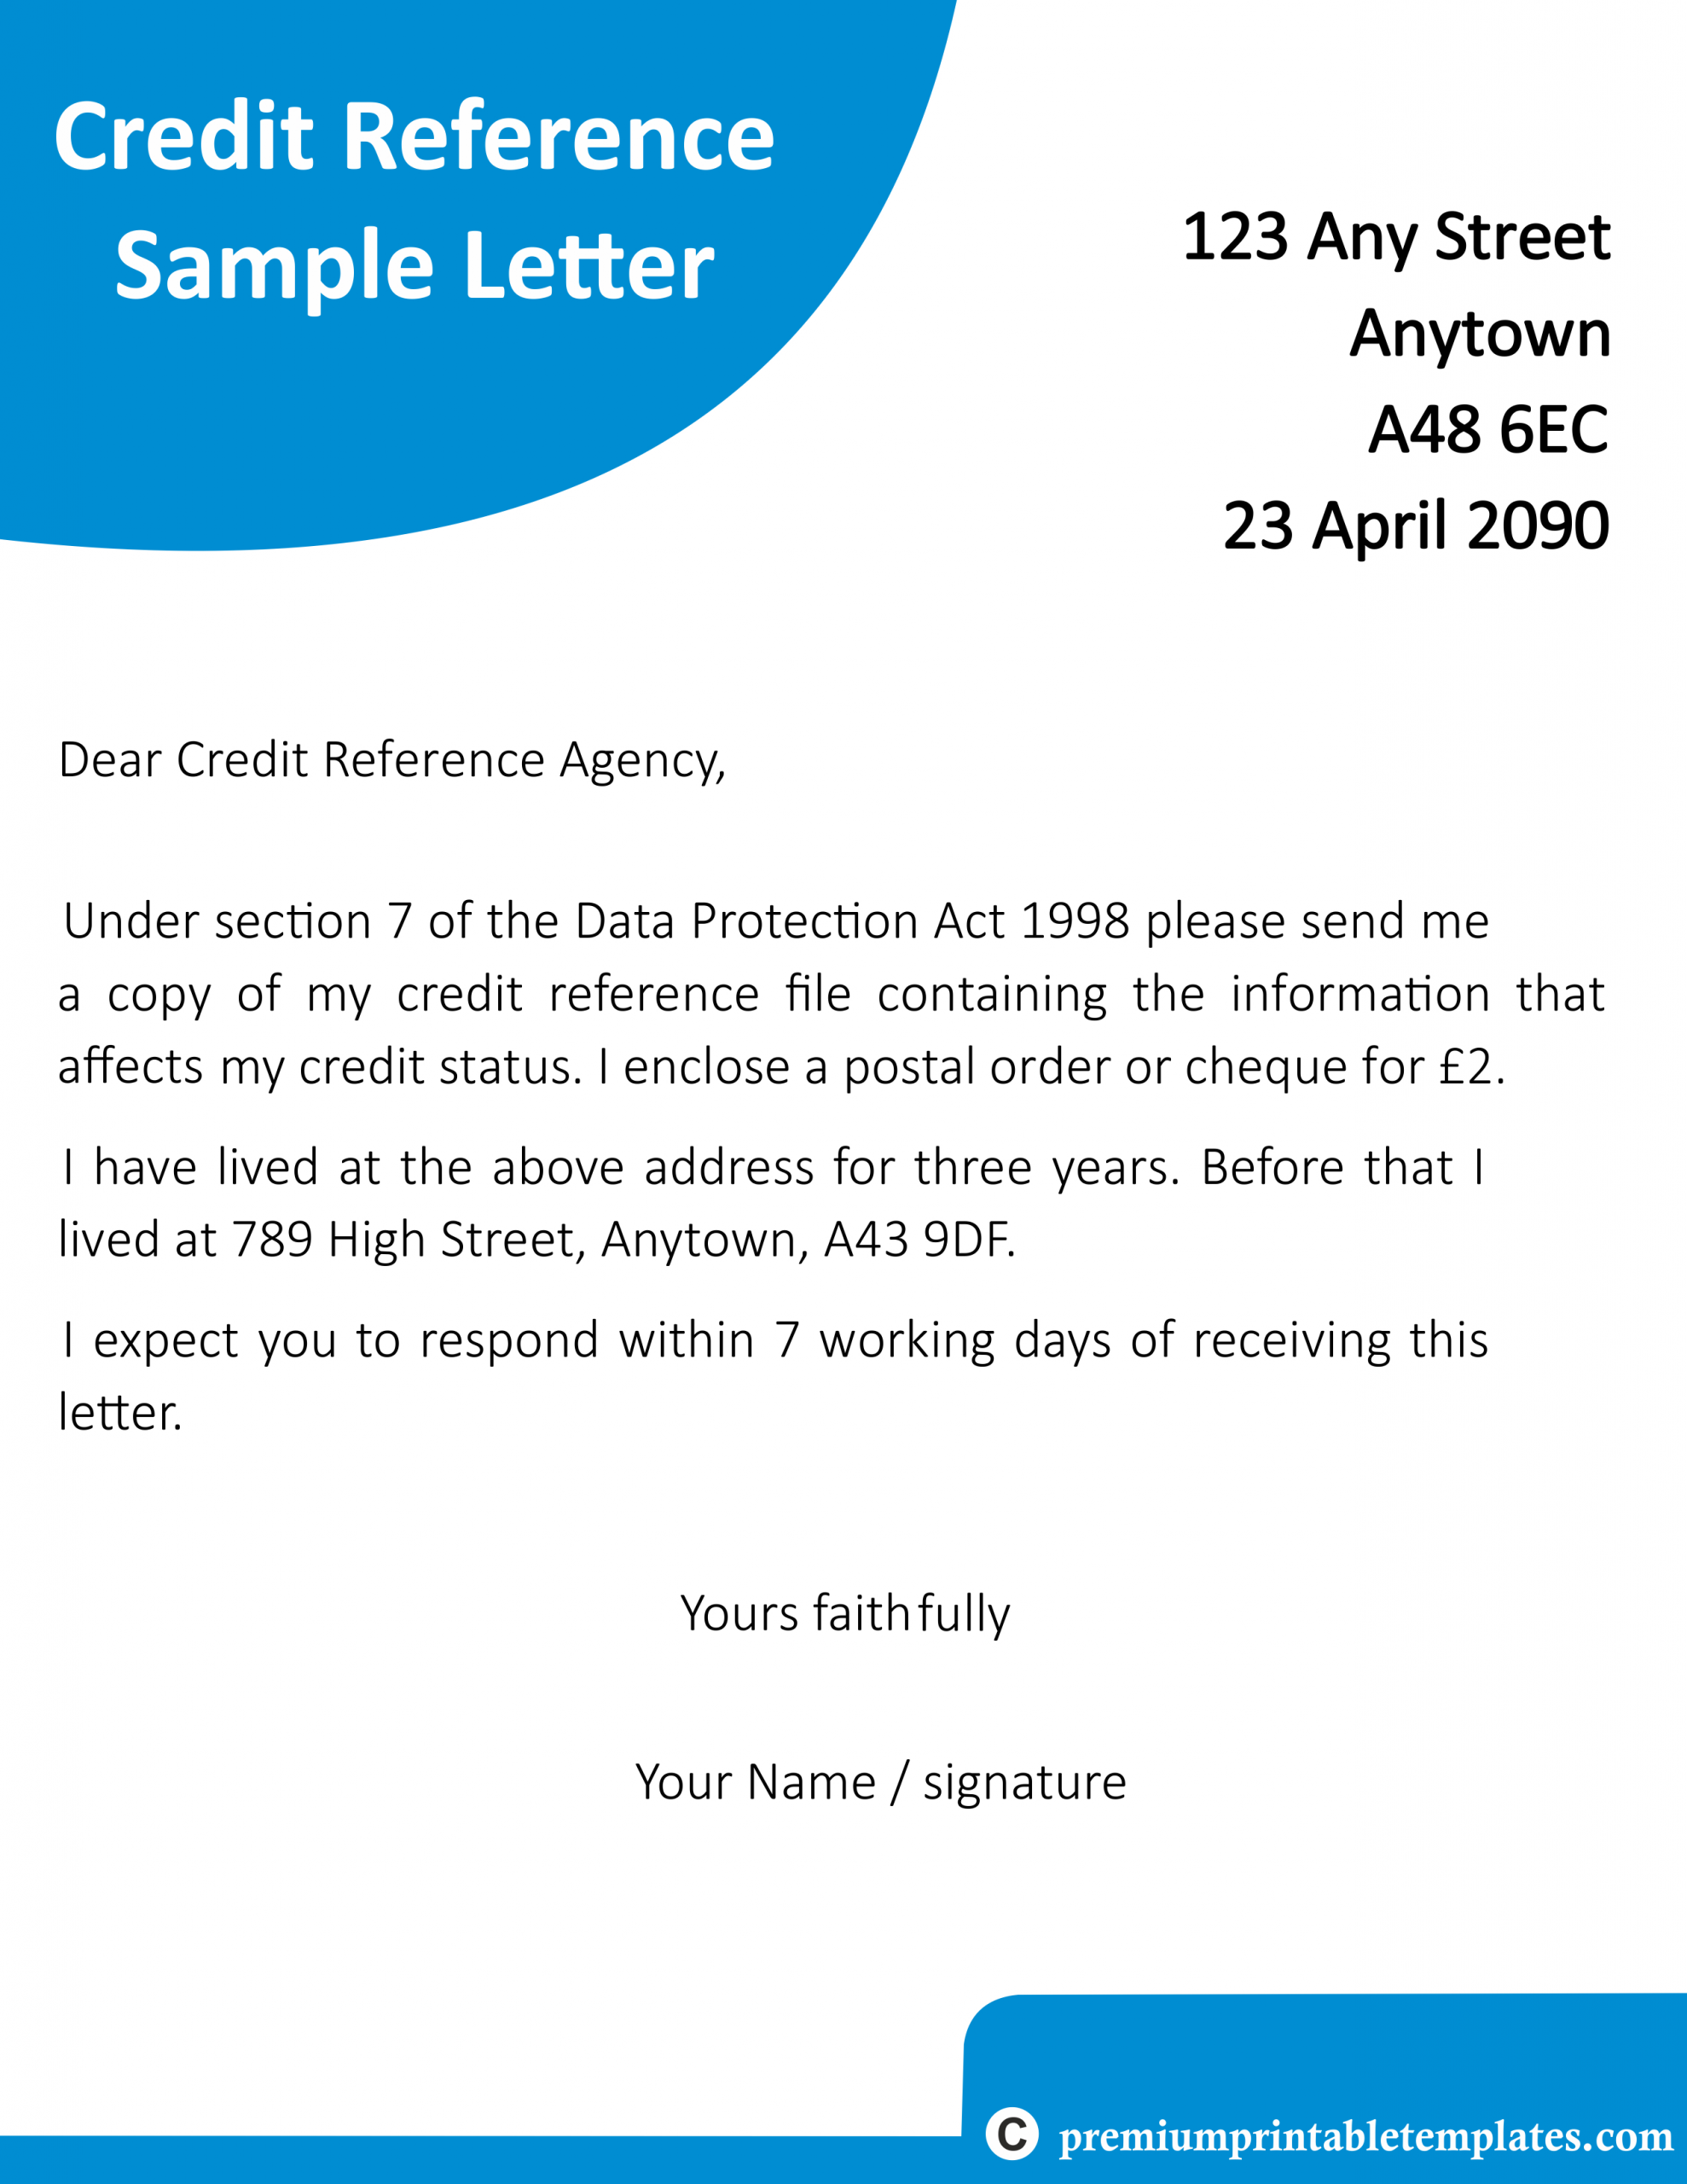 Credit Reference Letter Template Reference Letter Template within dimensions 2550 X 3300